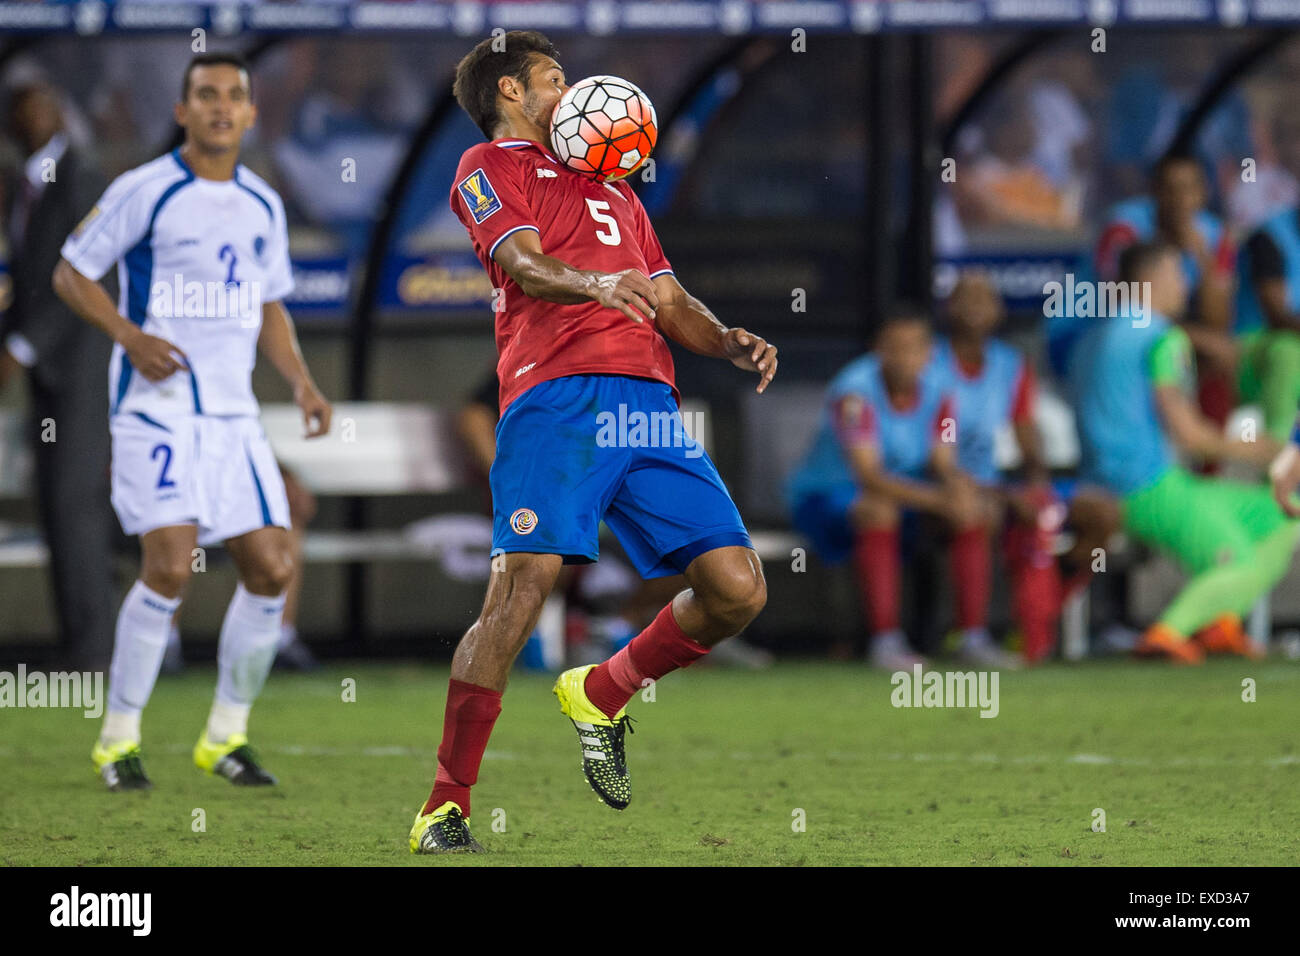 July 11, 2015: Costa Rica midfielder Celso Borges (5) controls the ball during the 2nd half of an international CONCACAF Gold Cup soccer match between Costa Rica and El Salvador at BBVA Compass Stadium in Houston, TX. The game ended in a 1-1 draw. Credit:  Cal Sport Media/Alamy Live News Stock Photo